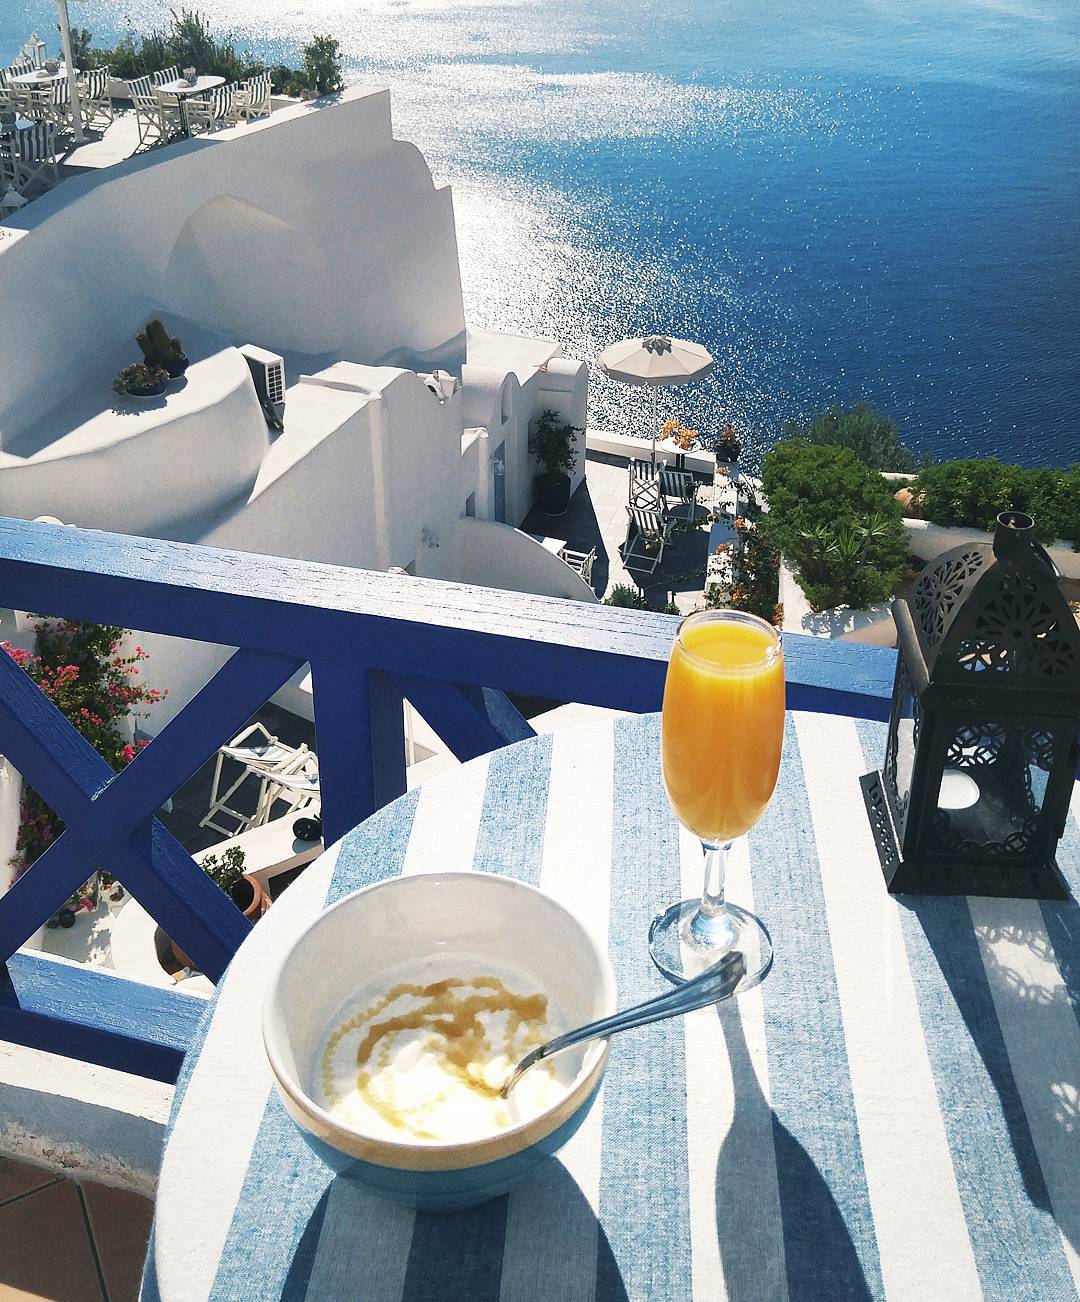 Where to find the best breakfast in Oia, Santorini